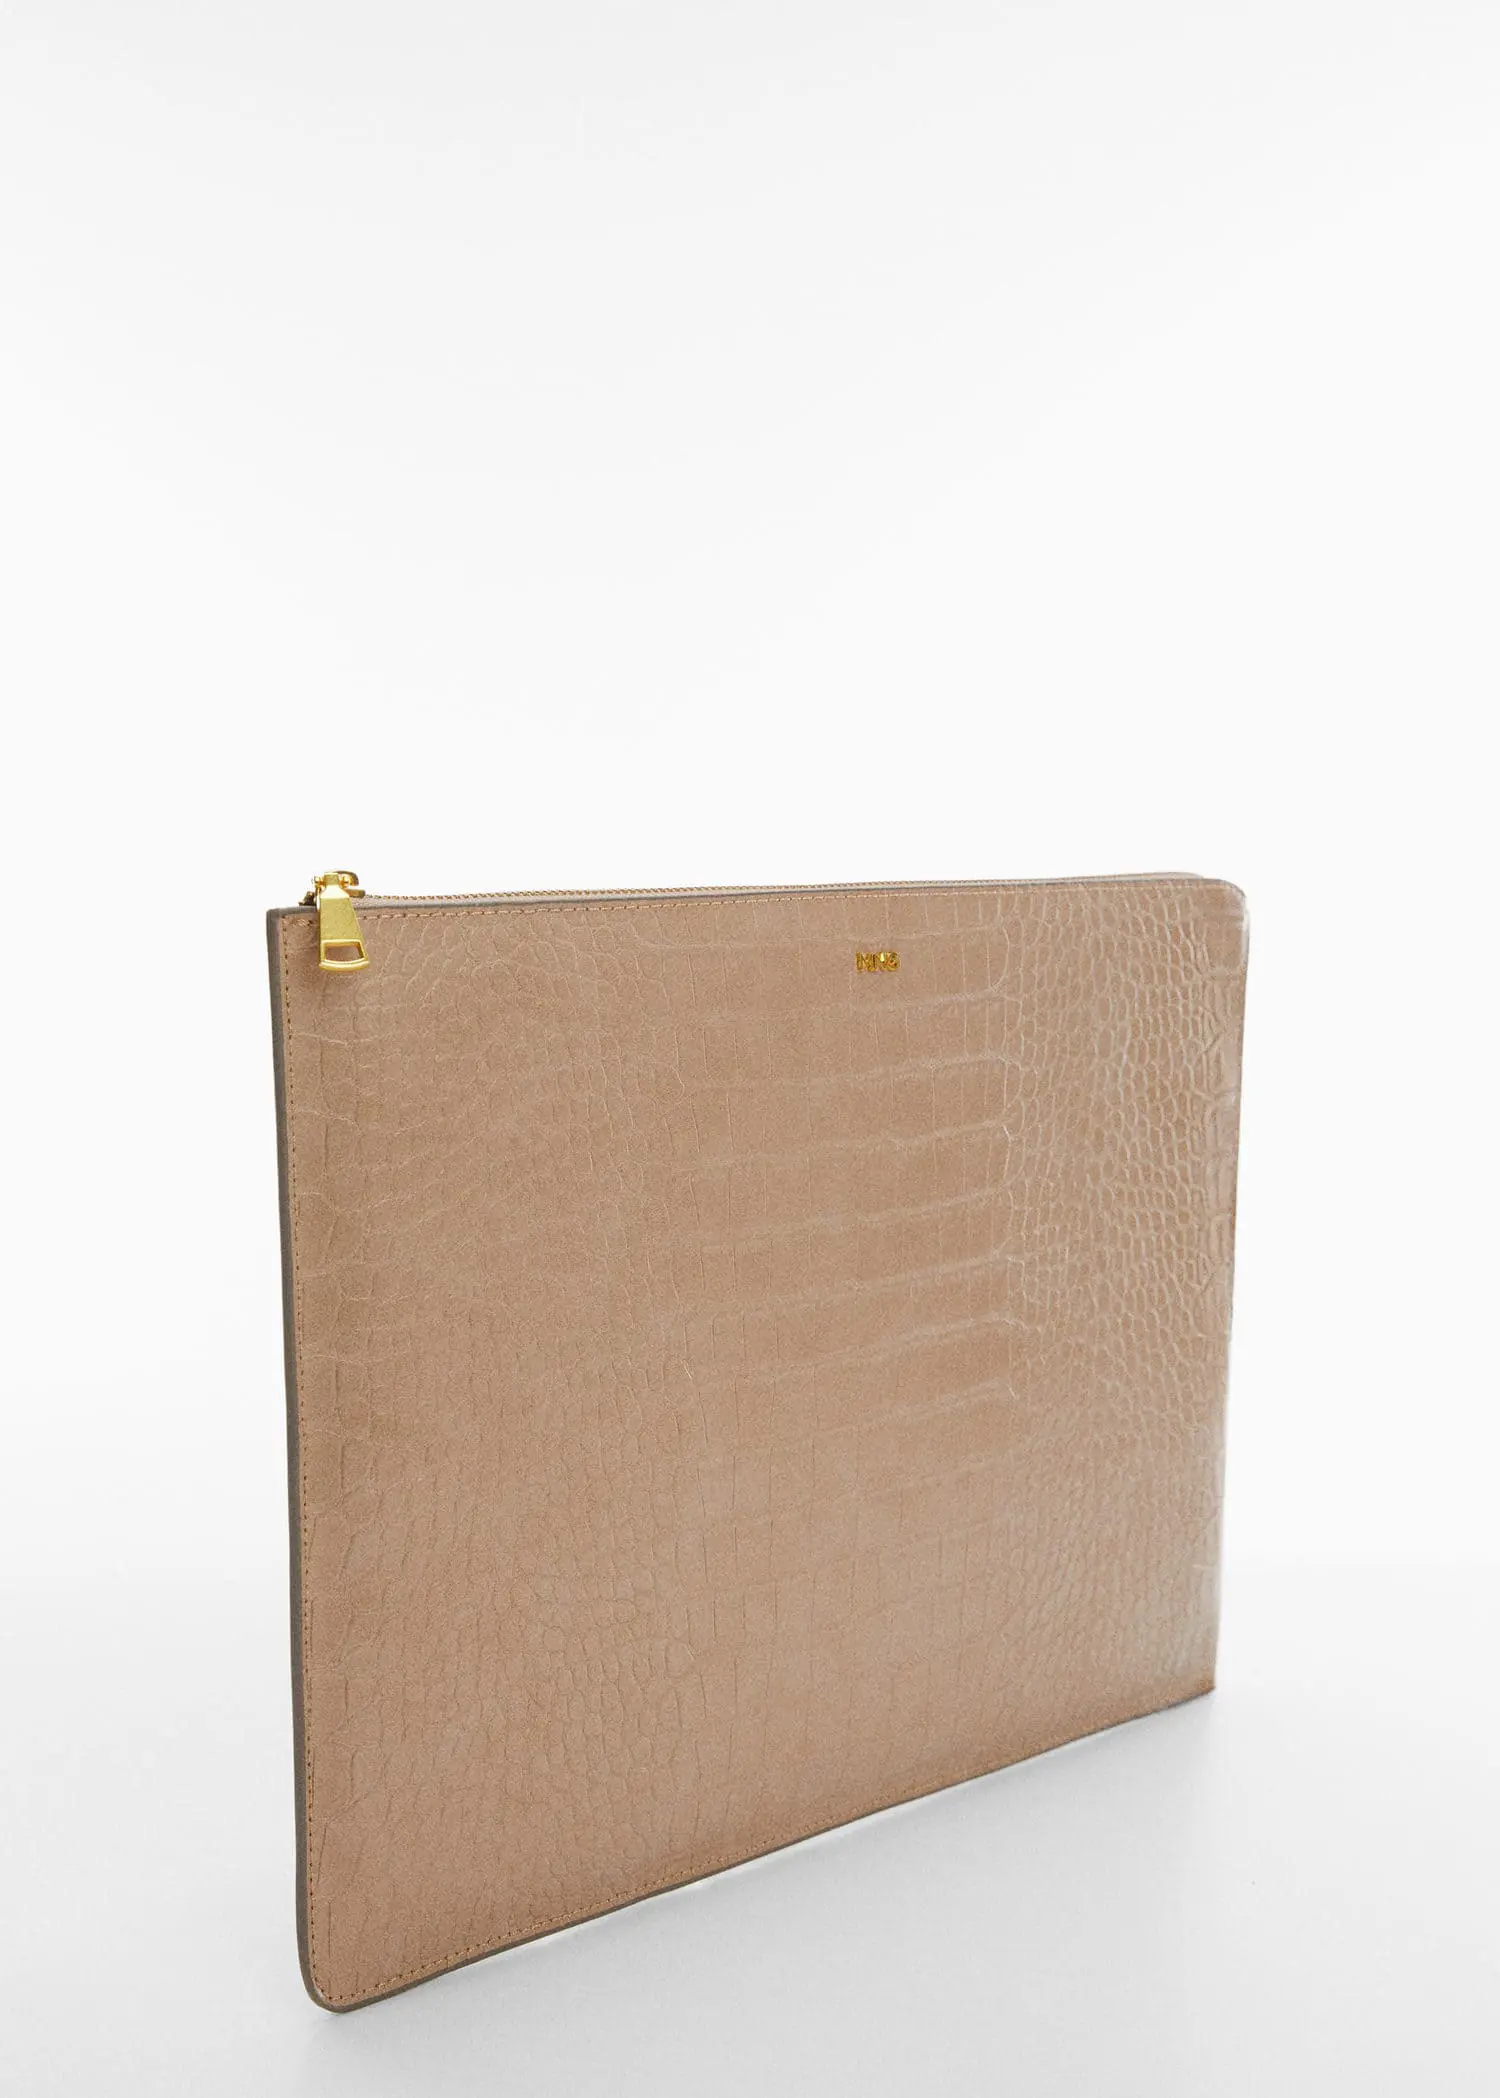 Mango Animal print laptop case. a brown leather case sitting on top of a white table. 